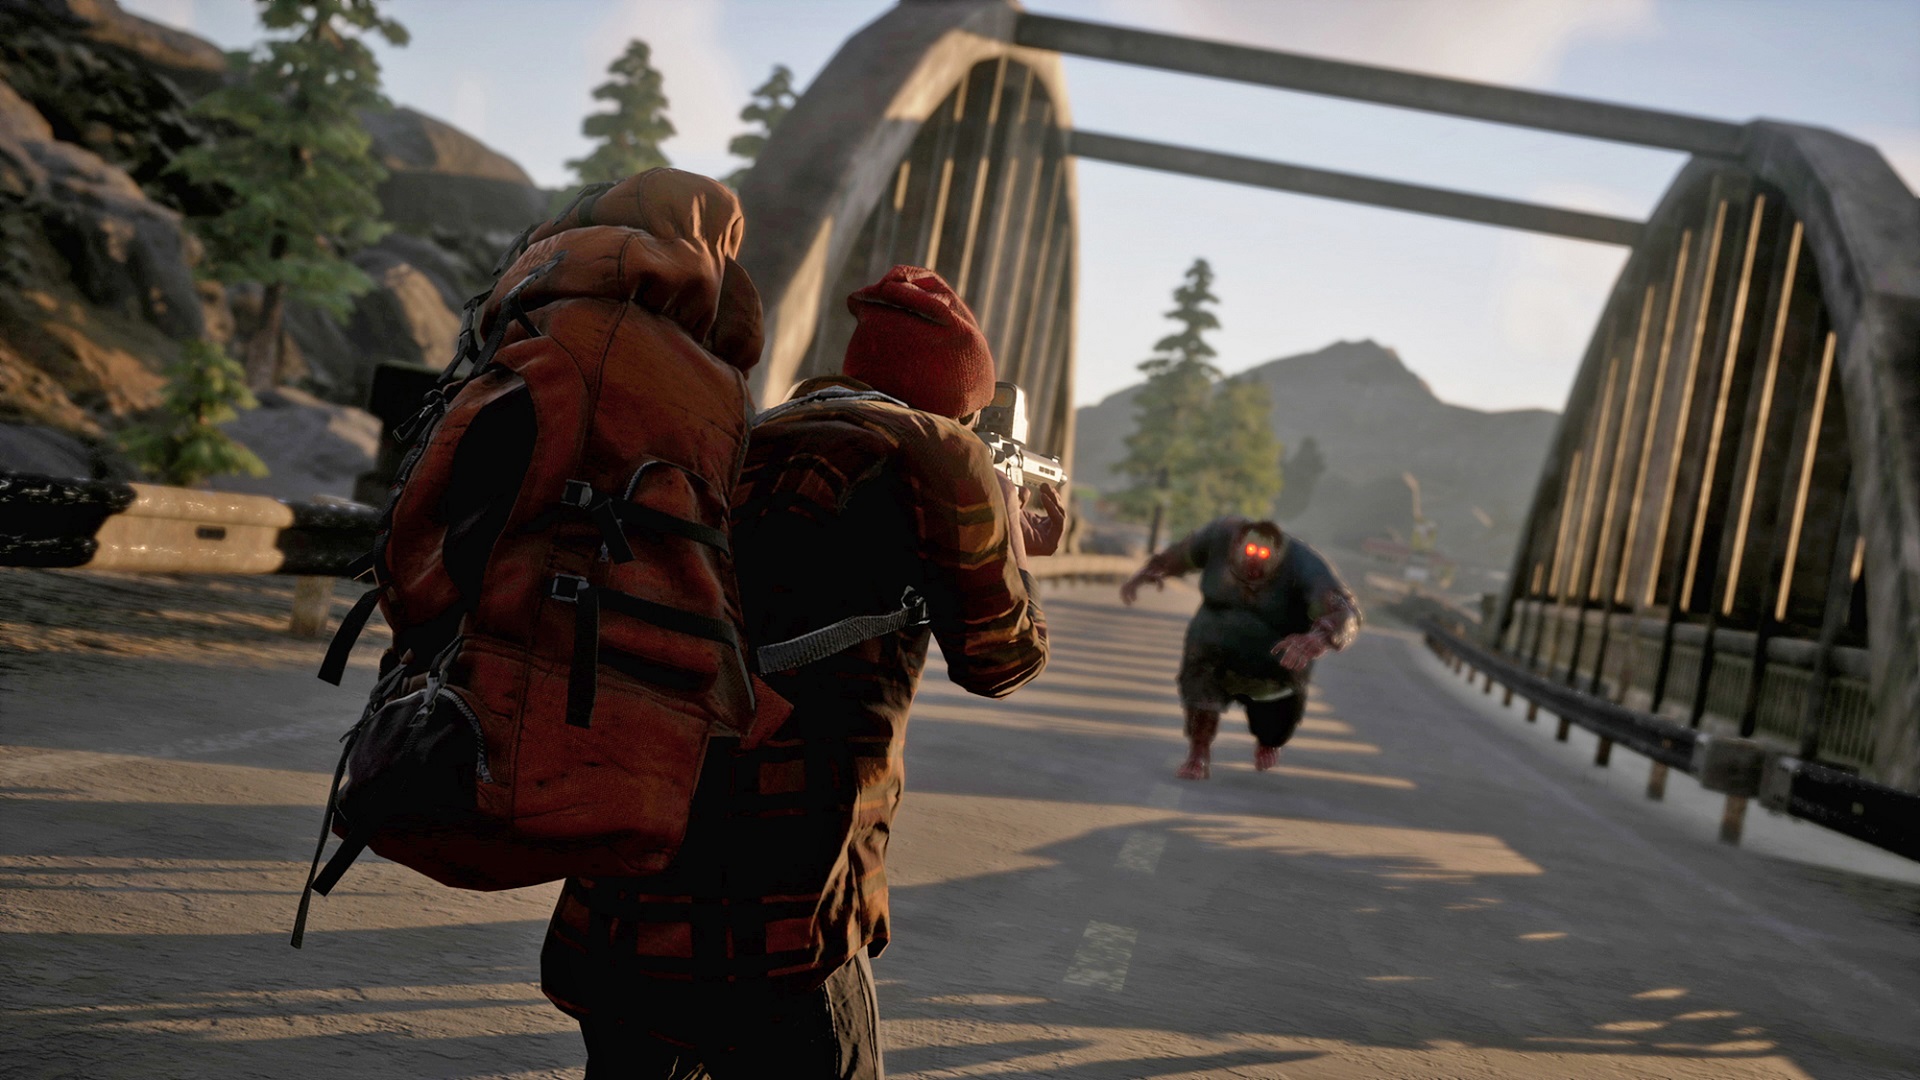 Gears Of War Studio Is Helping Develop State Of Decay 3 In UE5